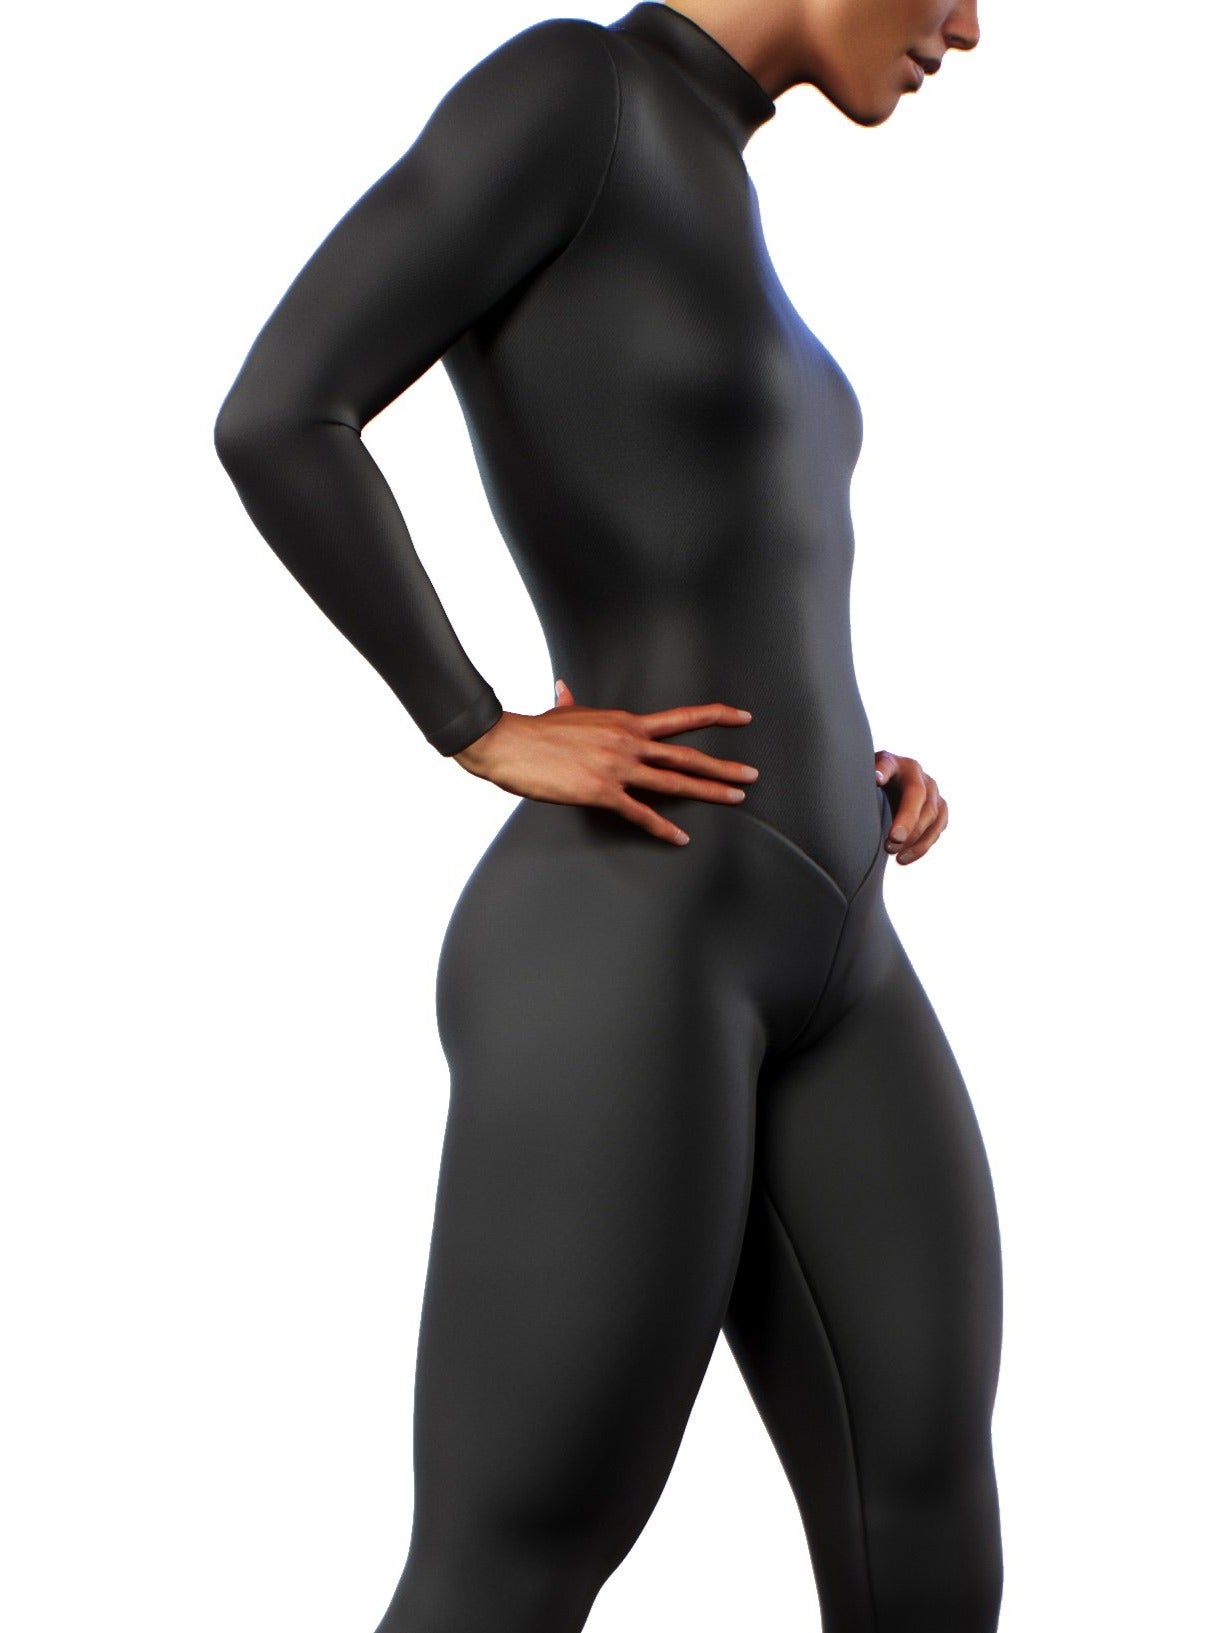 Black unitard outfit  Unitard outfit, Summer workout outfits